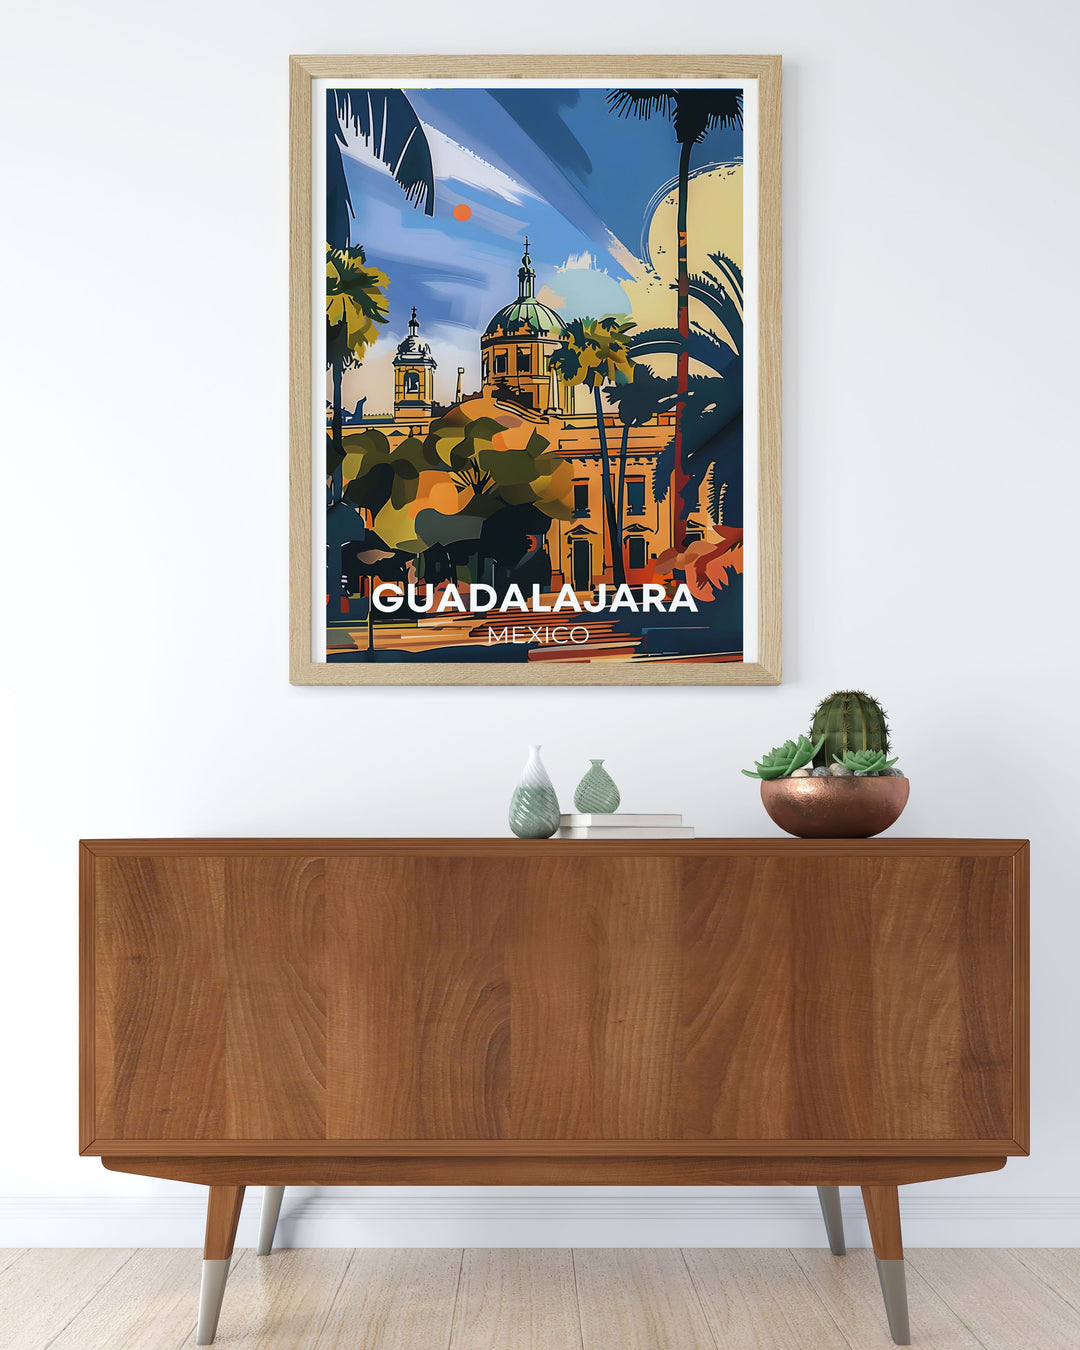 Featuring the majestic Guadalajara Cathedral, this art print highlights the intricate details and historical significance of one of Mexicos most iconic landmarks, making it an ideal addition to any room.